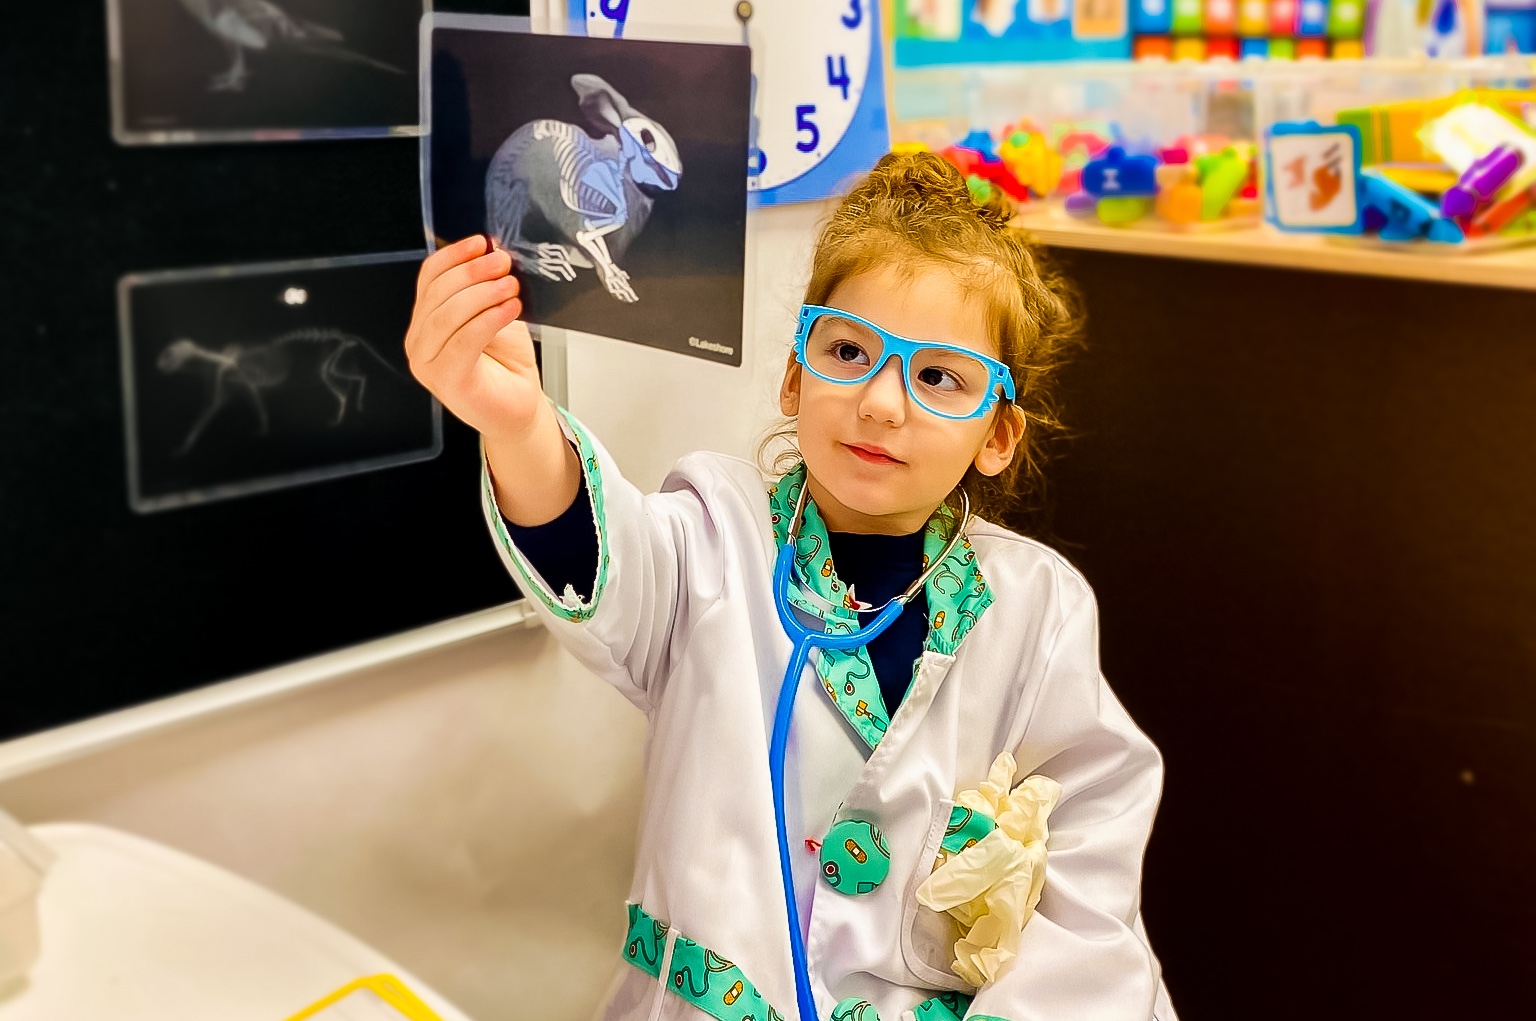 Young girl dressed as a doctor holding up an X-ray of a rabbit in a daycare classroom